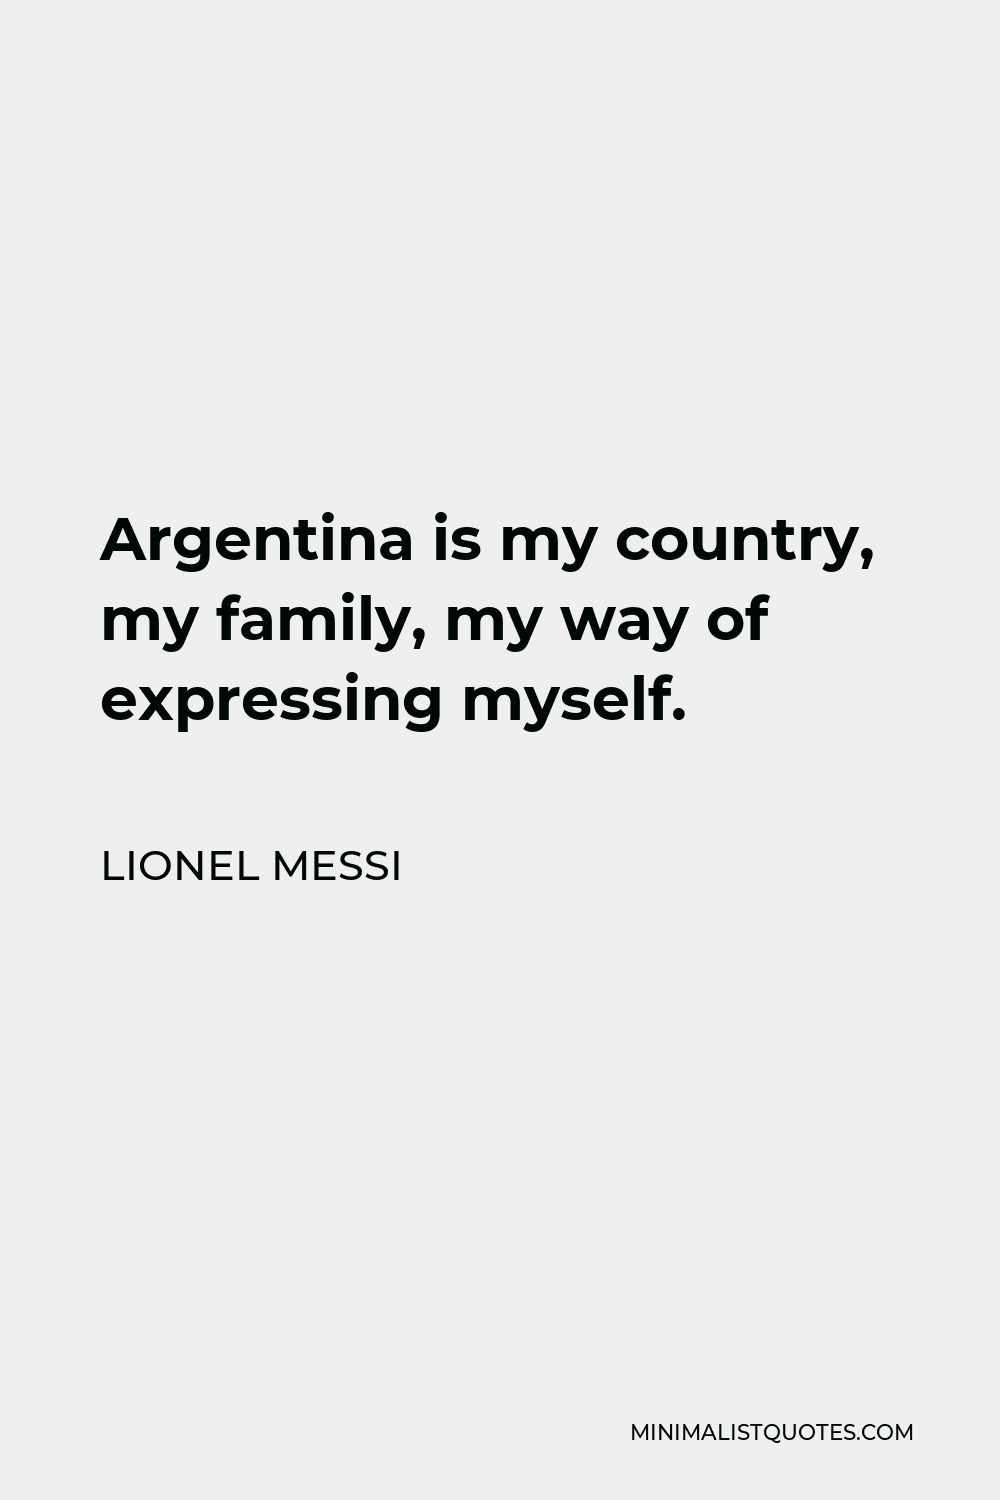 Lionel Messi Quote - Argentina is my country, my family, my way of expressing myself.